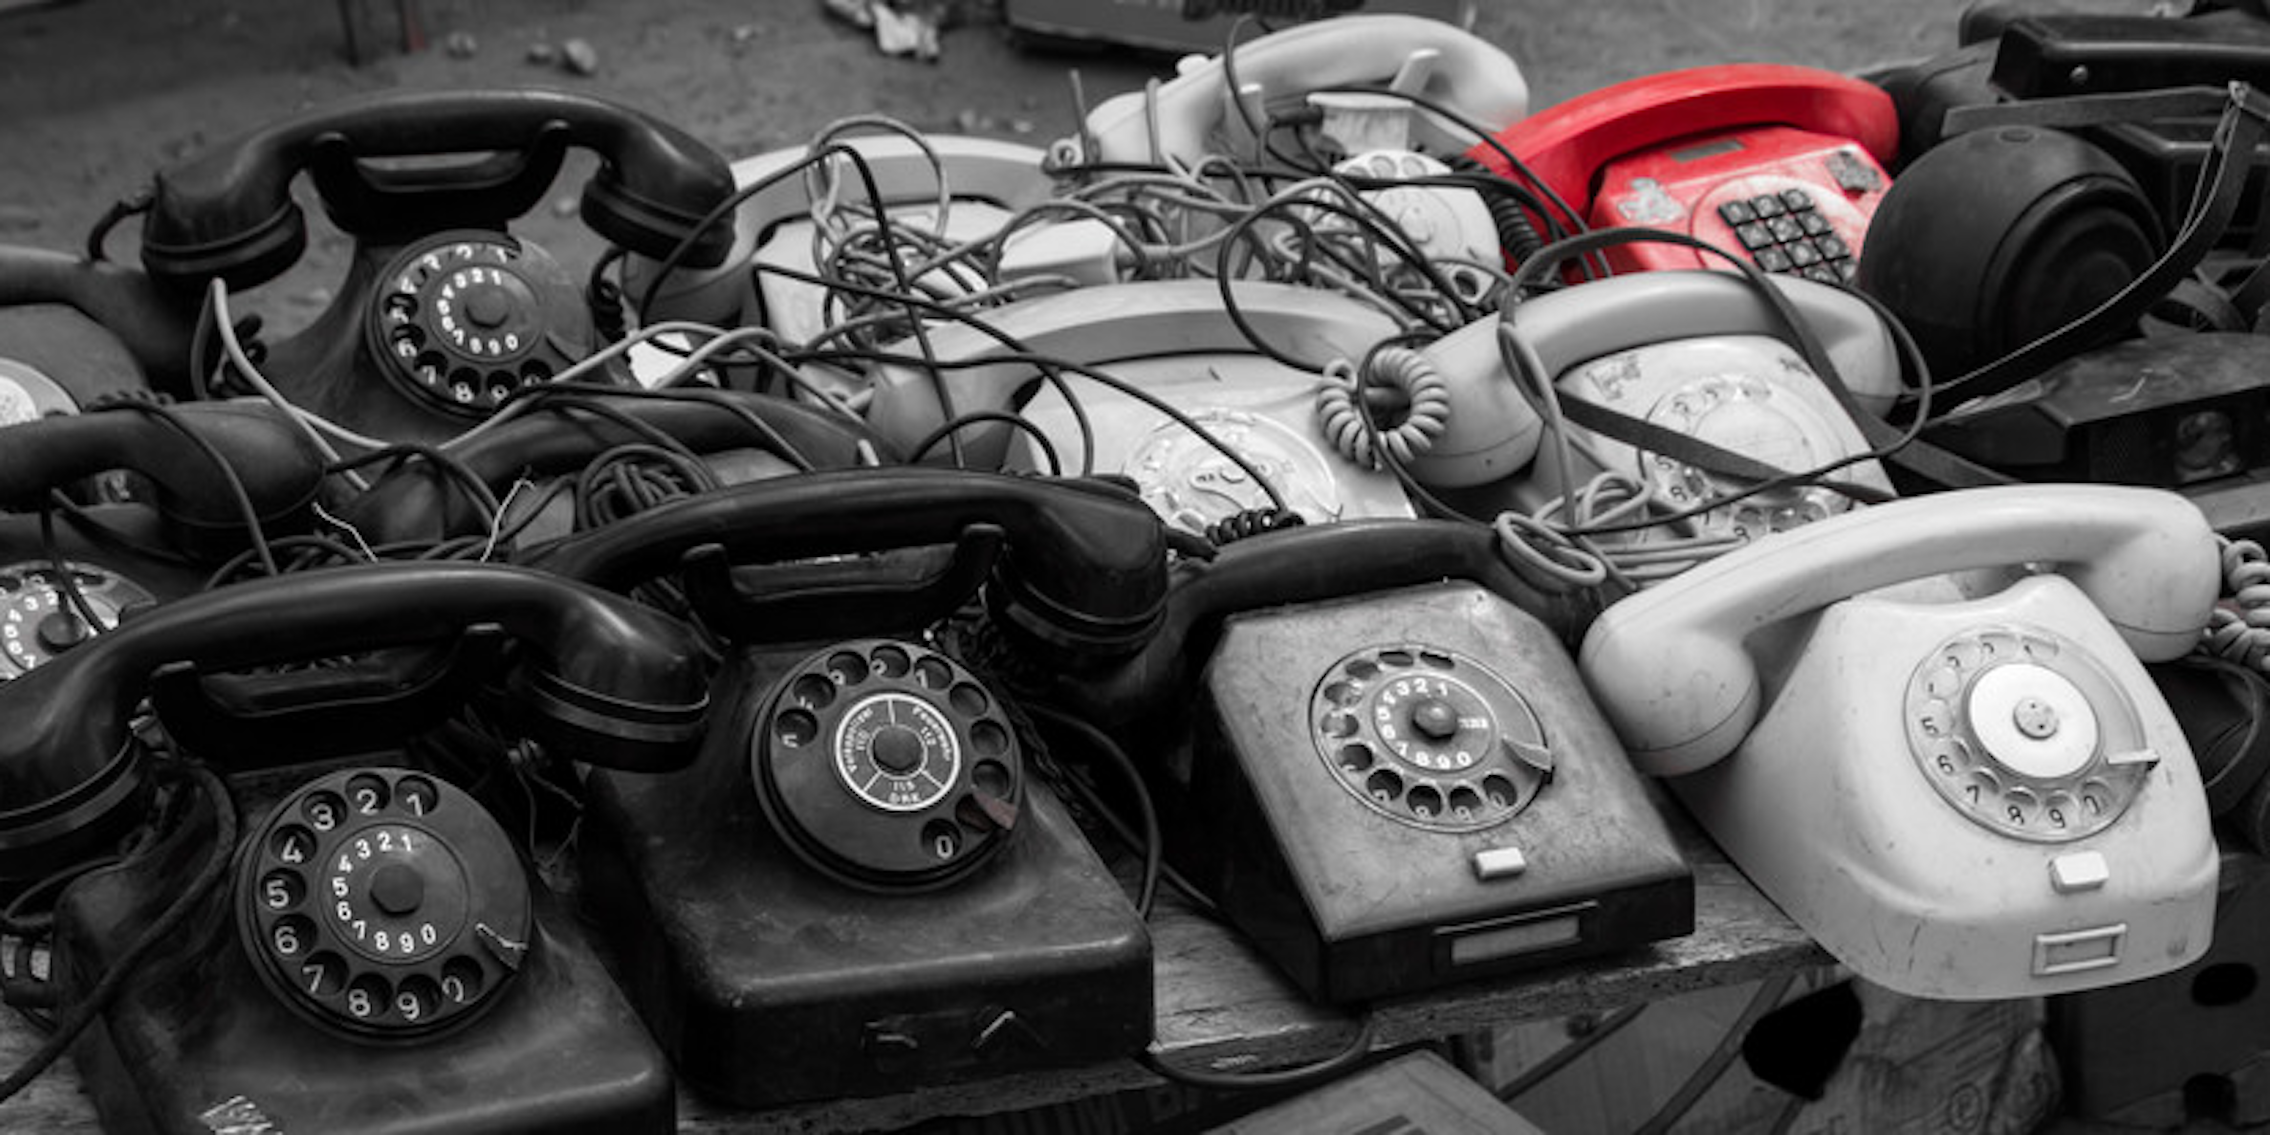 A pile of rotary phones in black and white, one red